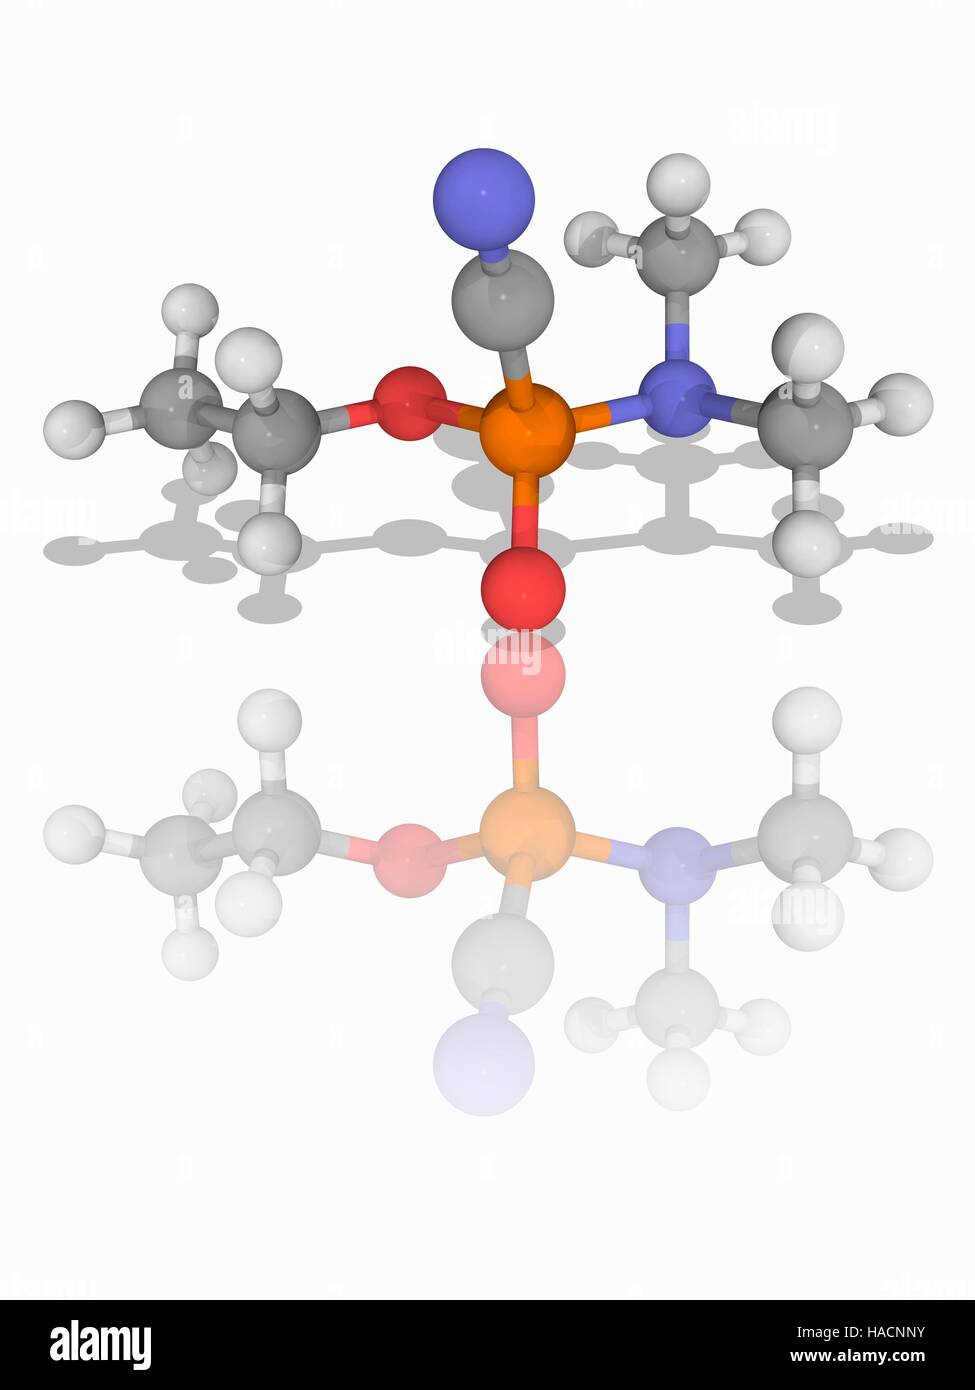 Tabun. Molecular model of the extremely toxic nerve agent tabun (C5.H11.N2.O2.P). Chemically, it is an ethyl ester. It was the first (GA) in the G-series of nerve agent chemical weapons. Atoms are represented as spheres and are colour-coded: carbon (grey), hydrogen (white), nitrogen (blue), oxygen (red) and phosphorus (orange). Illustration. Stock Photo